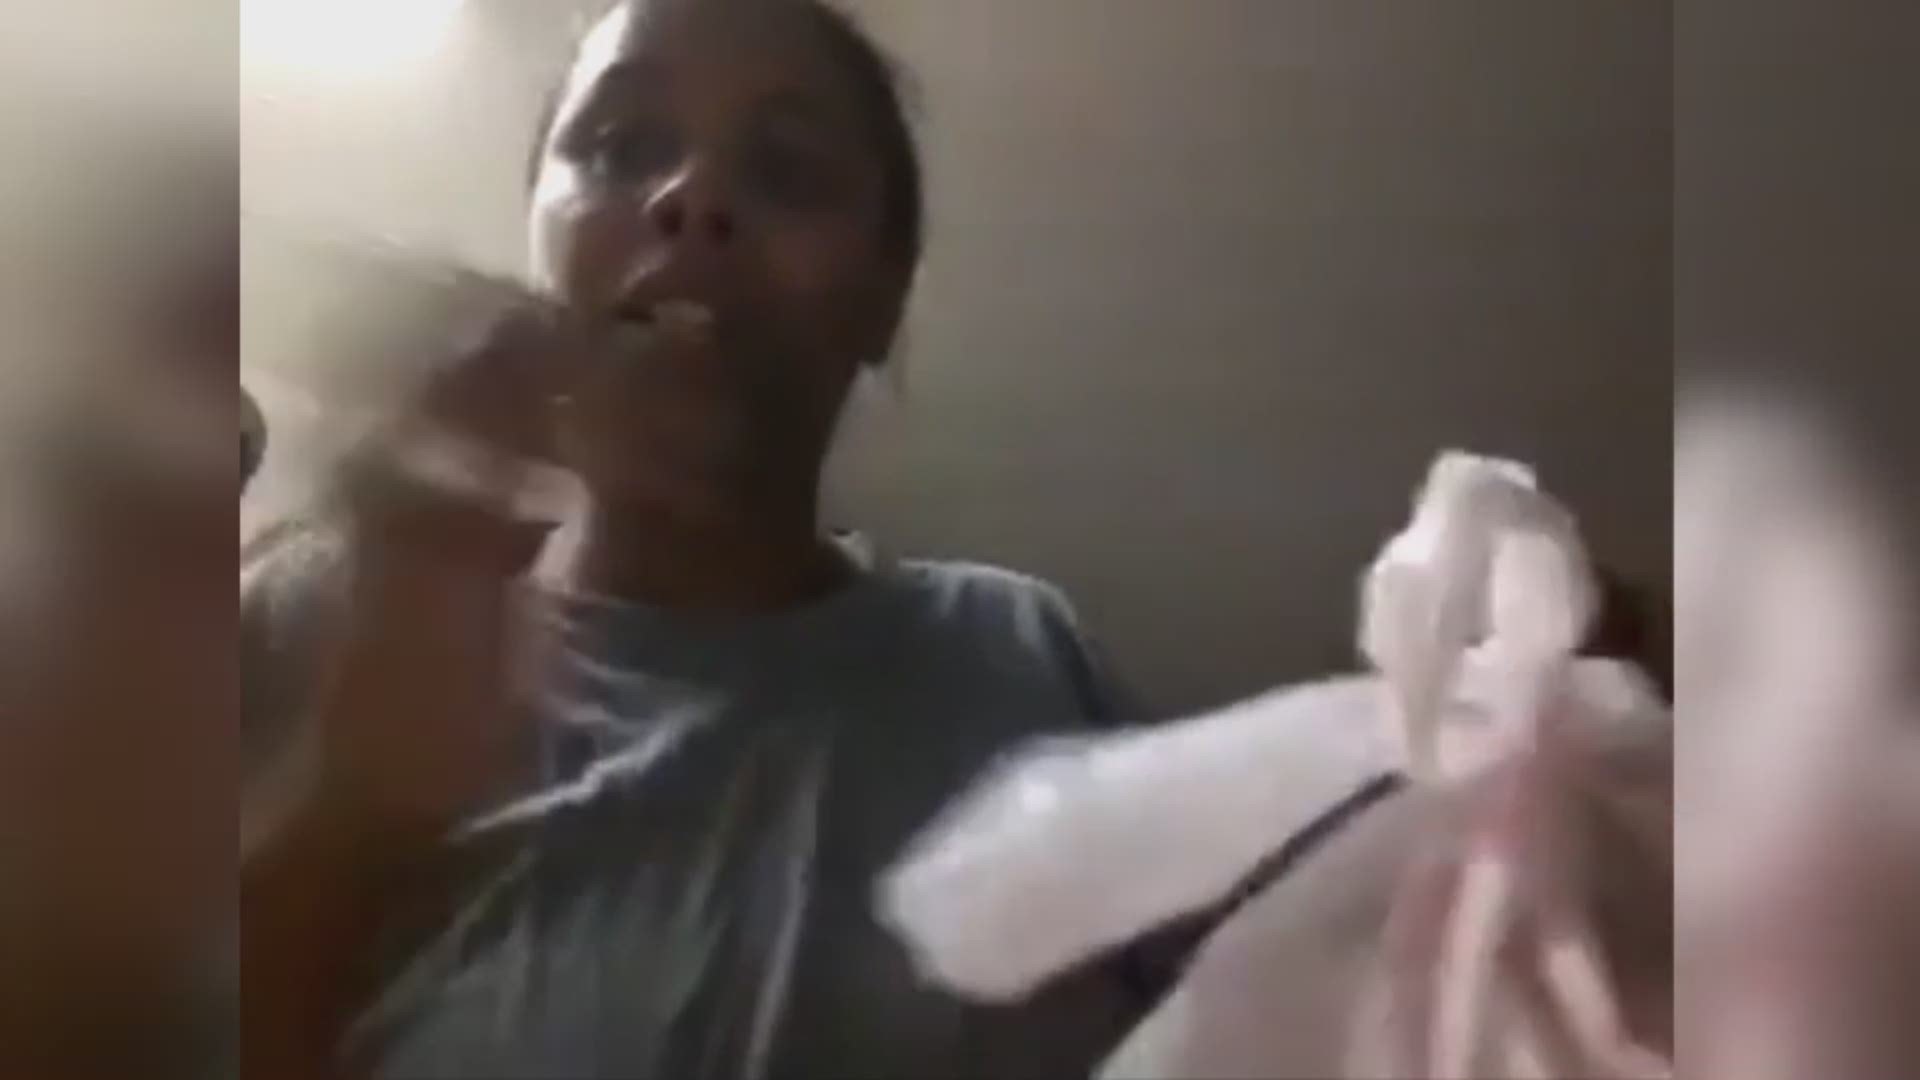 A Newport News woman has gone viral with a video of her first time trying to steam crabs. Right off the bat she gets into a pinch.